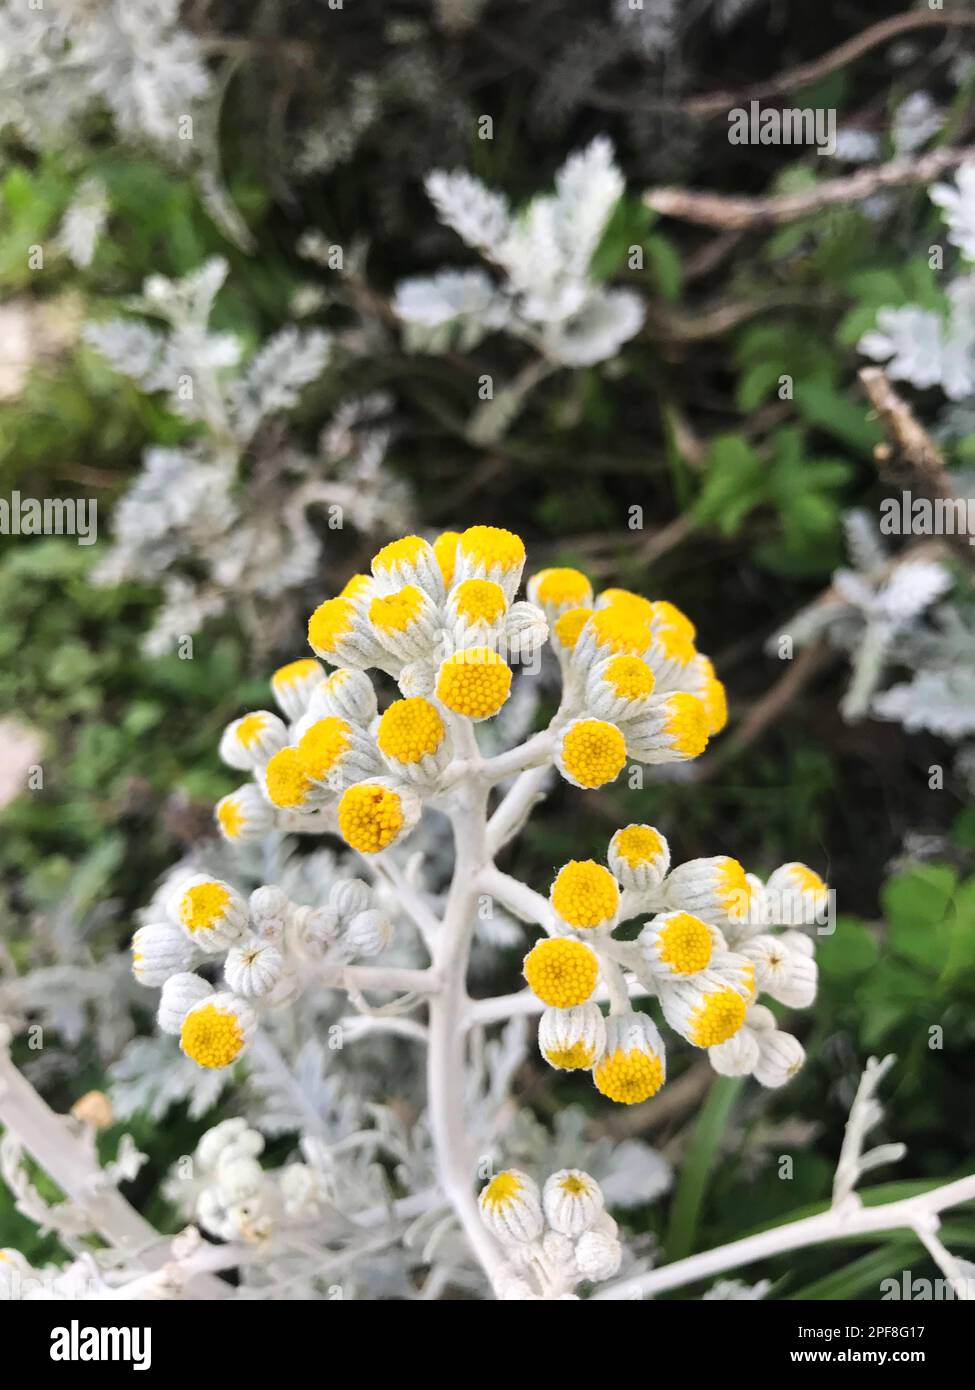 Golden tuft or Golden cudweed (Turkish: Olmez Cicek) in the nature. Stock Photo